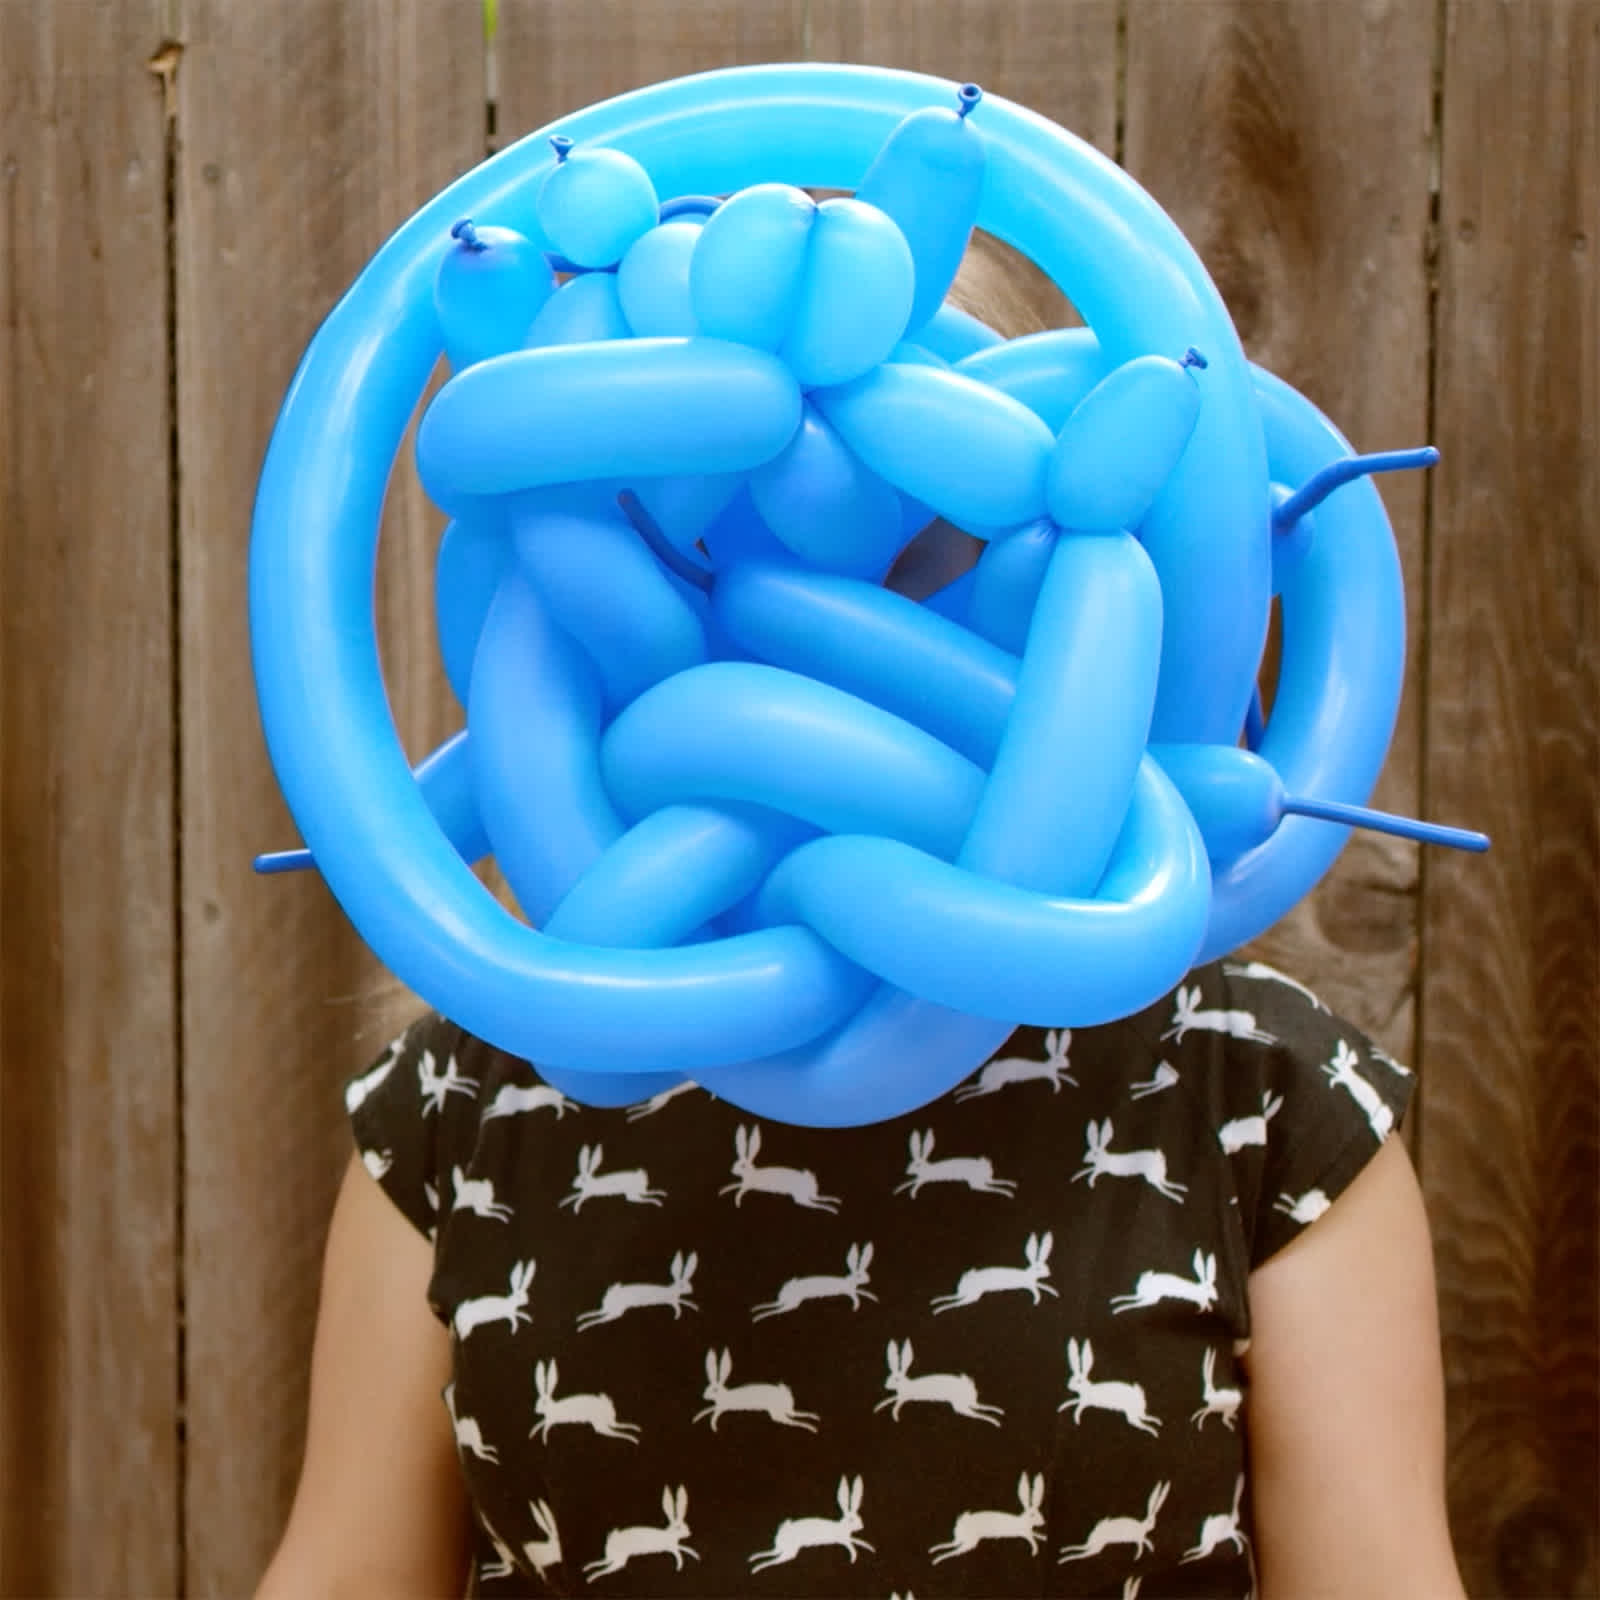 A woman wearing a dress holding a blue balloon over her face.